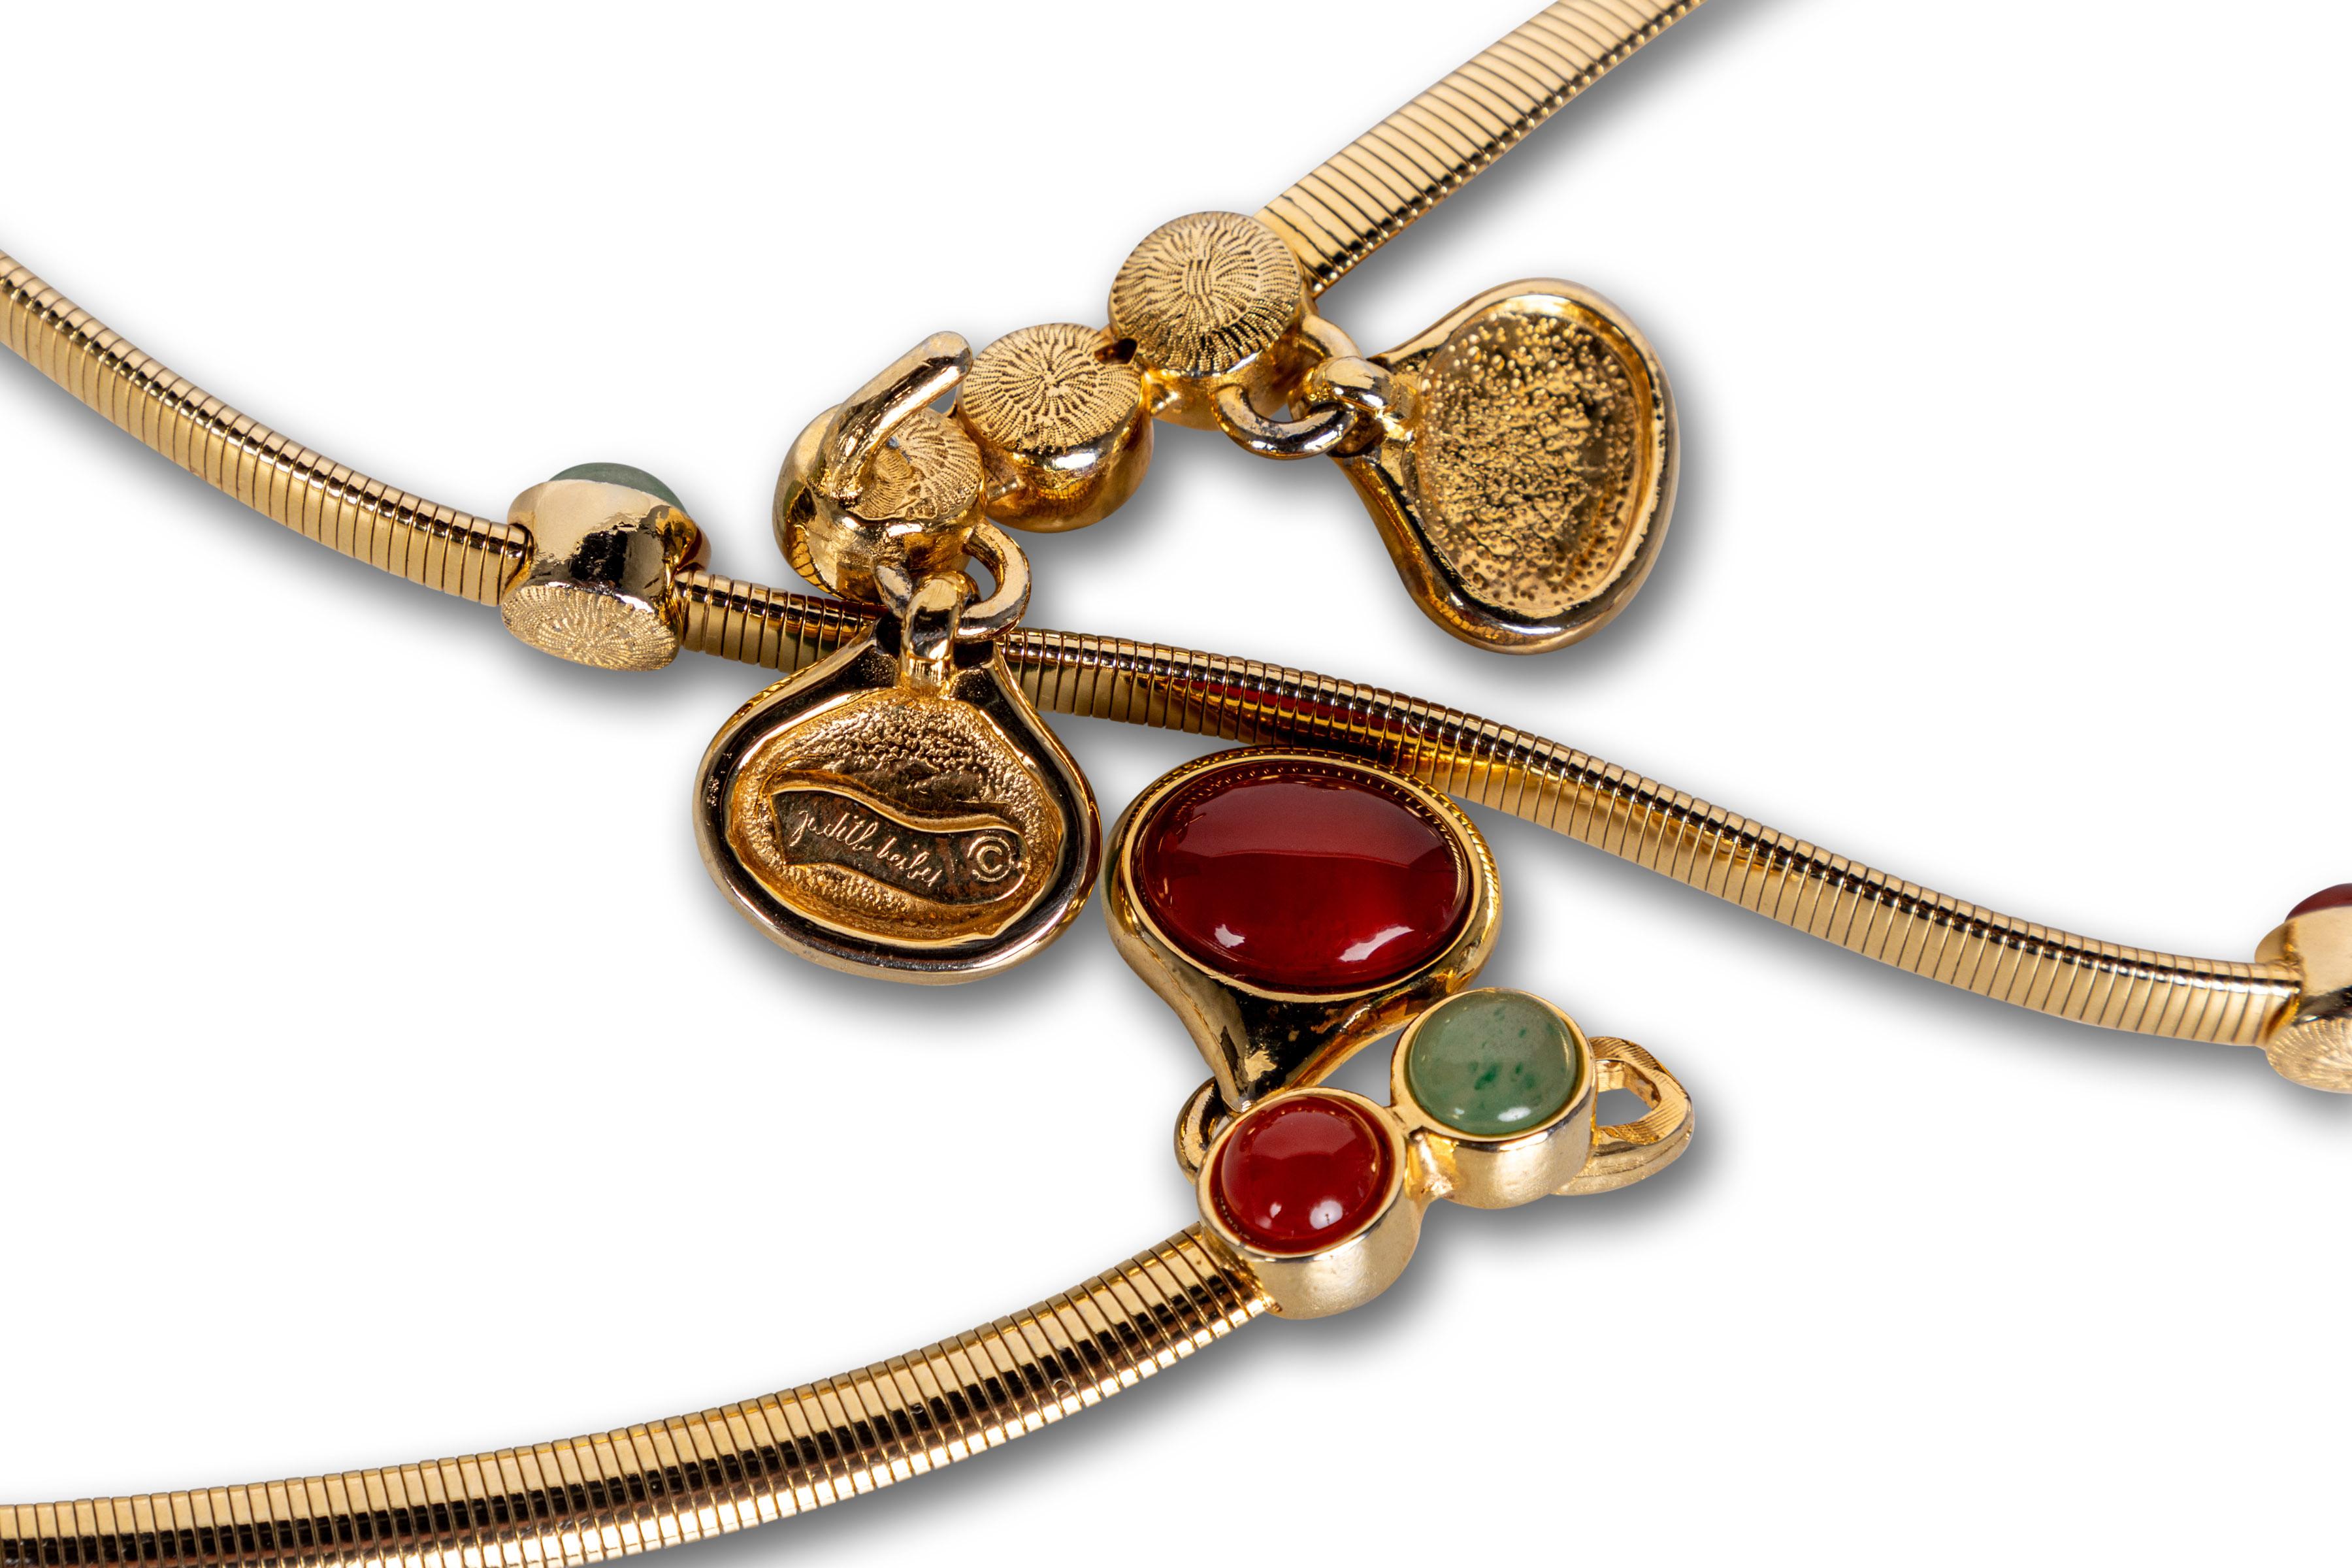 Judith Leiber Gold Snake Chain Jade & Carnelian Belt In Excellent Condition For Sale In Boca Raton, FL